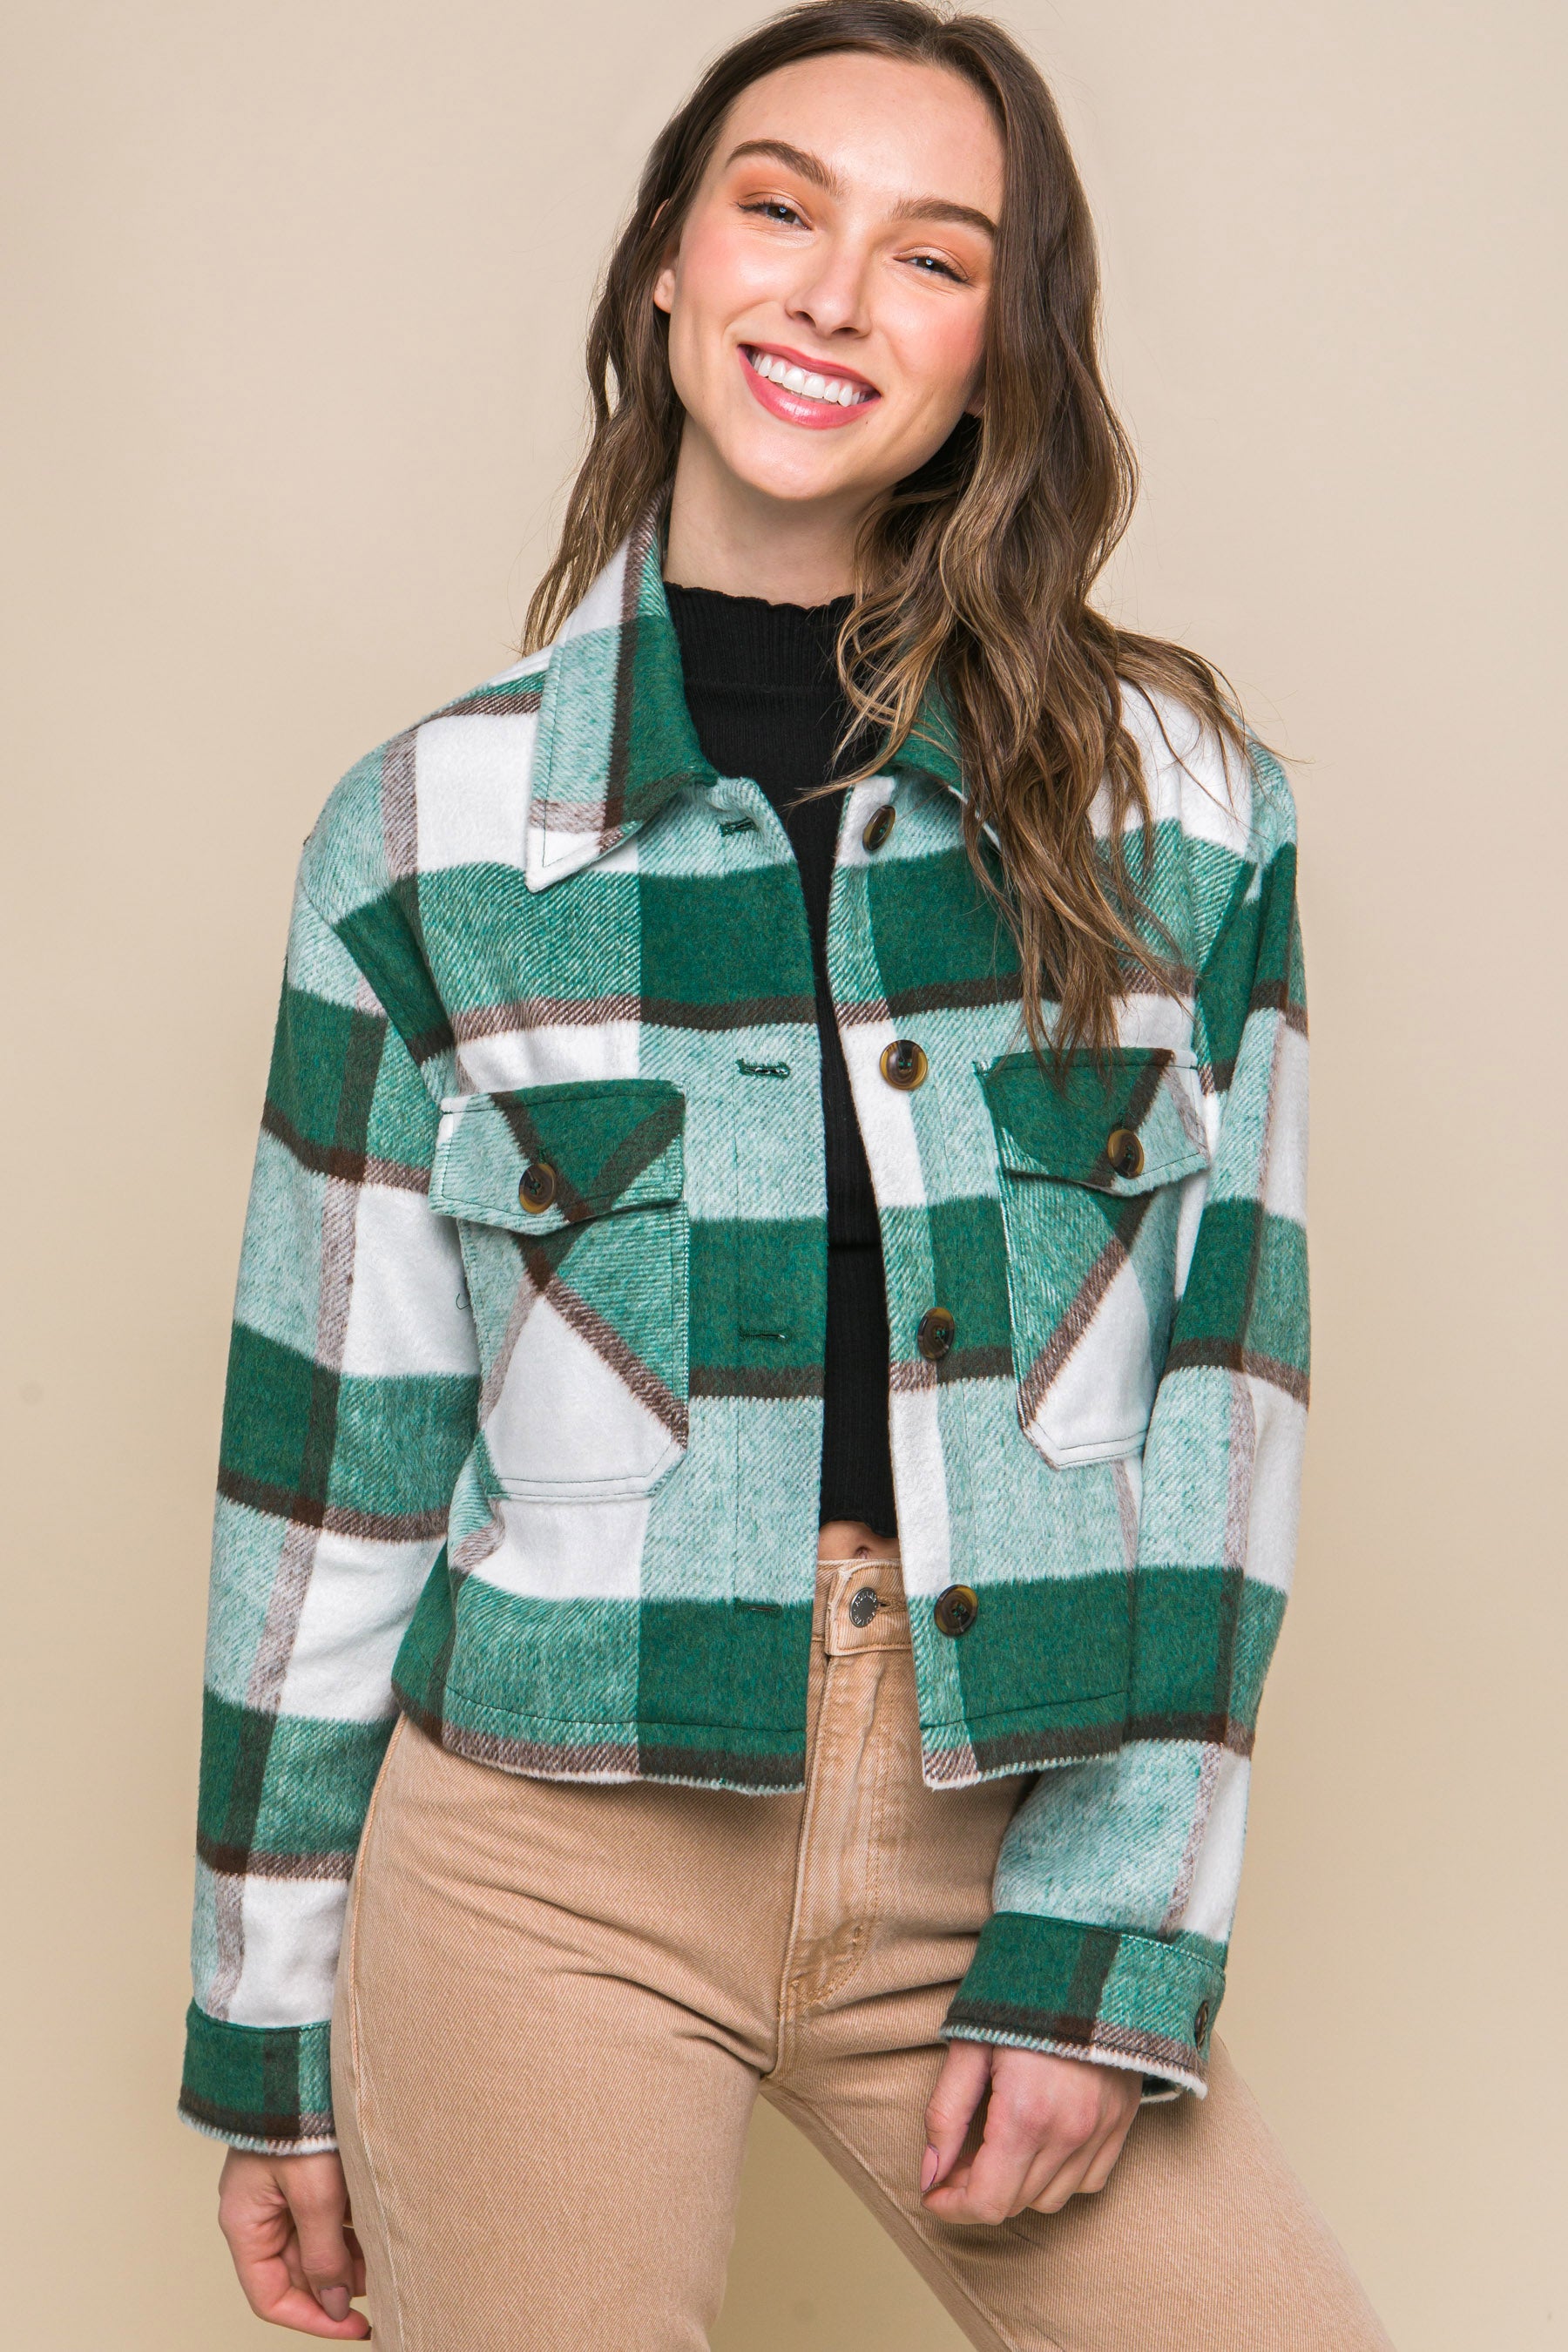 - Yarn Dyed Plaid Button Up Jacket - 2 colors - womens jacket at TFC&H Co.